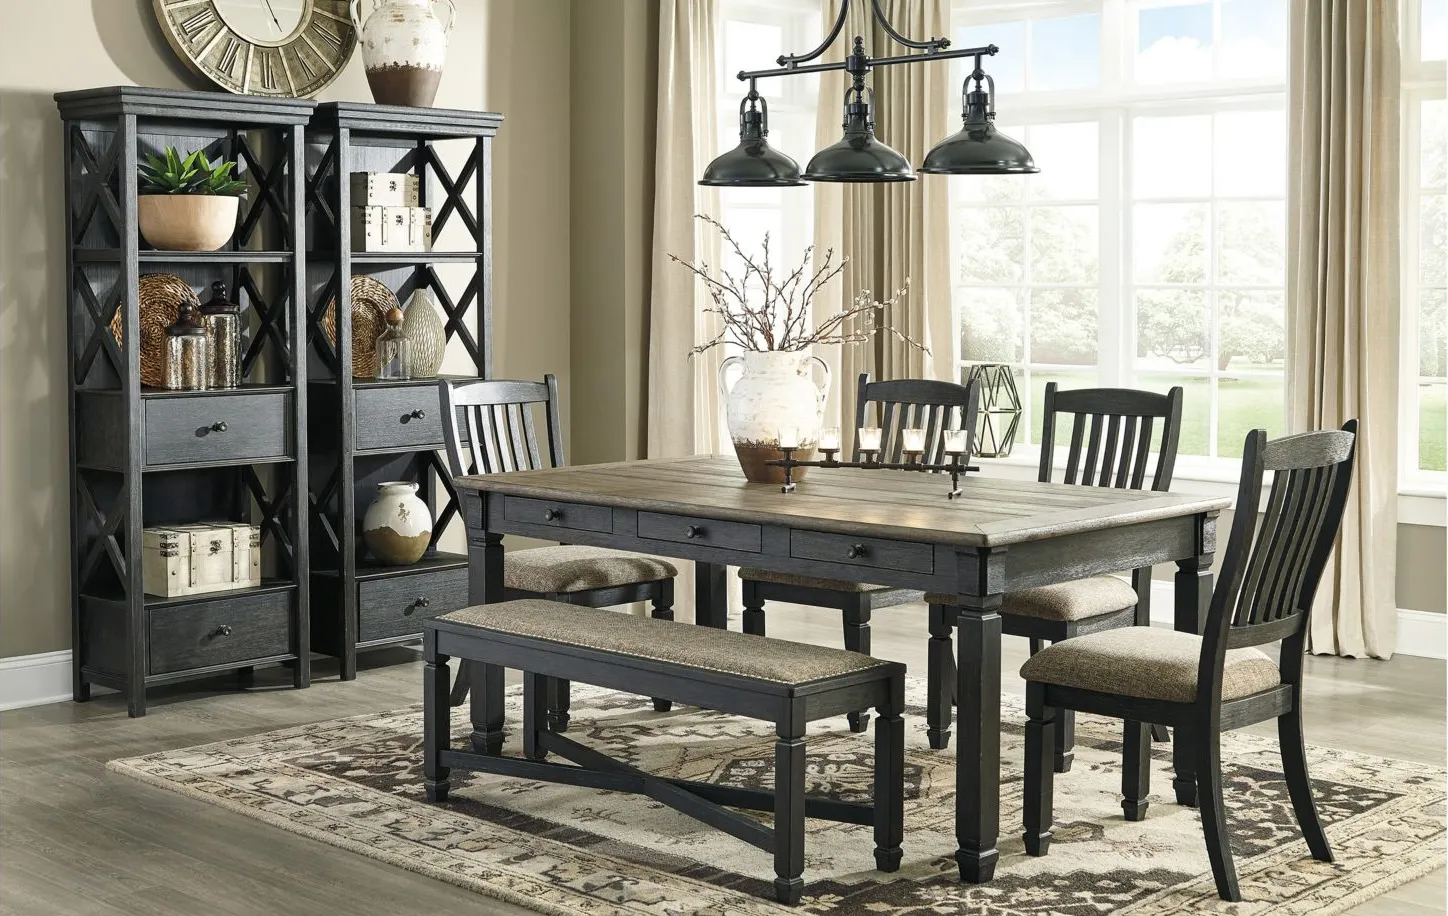 Vail 6-pc. Dining Set w/ Bench in Gray / Black by Ashley Furniture